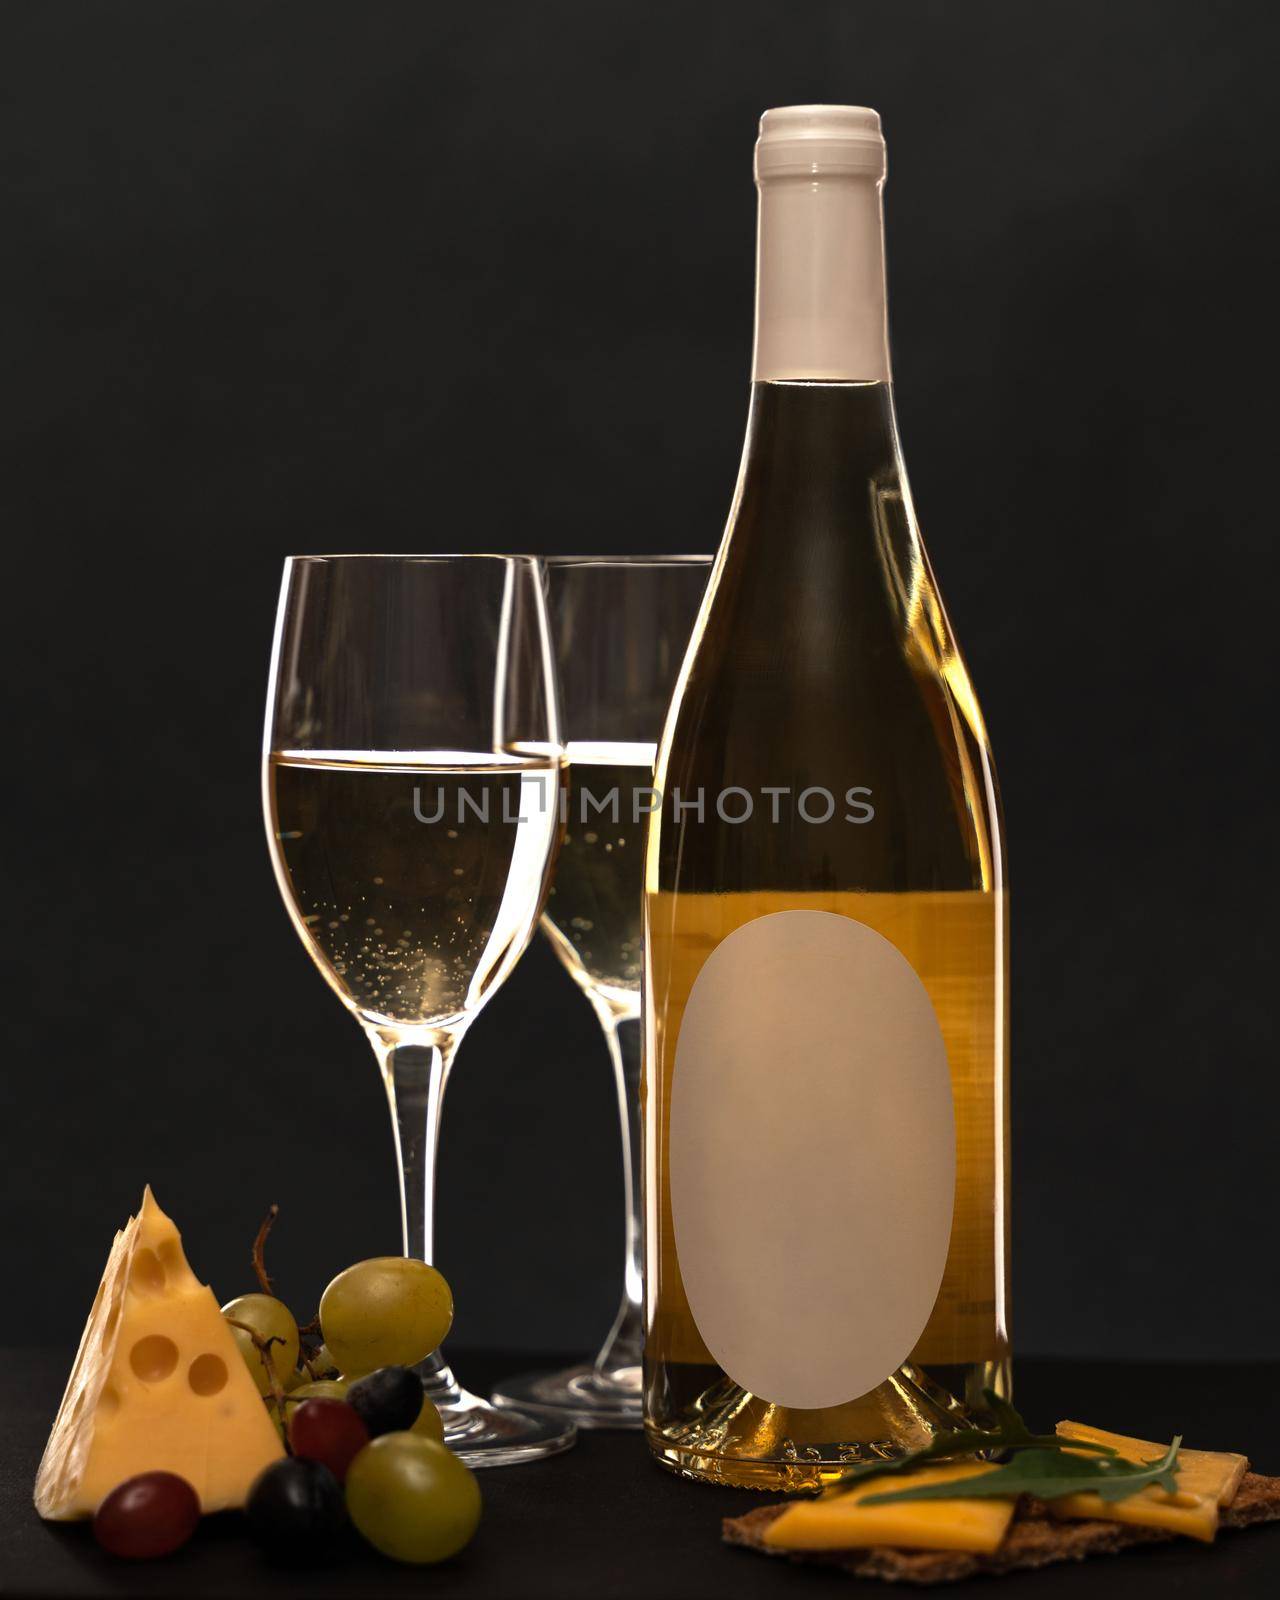 On a black background, a bottle of white wine, two glasses of white wine, next to grapes, a piece of triangular cheese, a sandwich